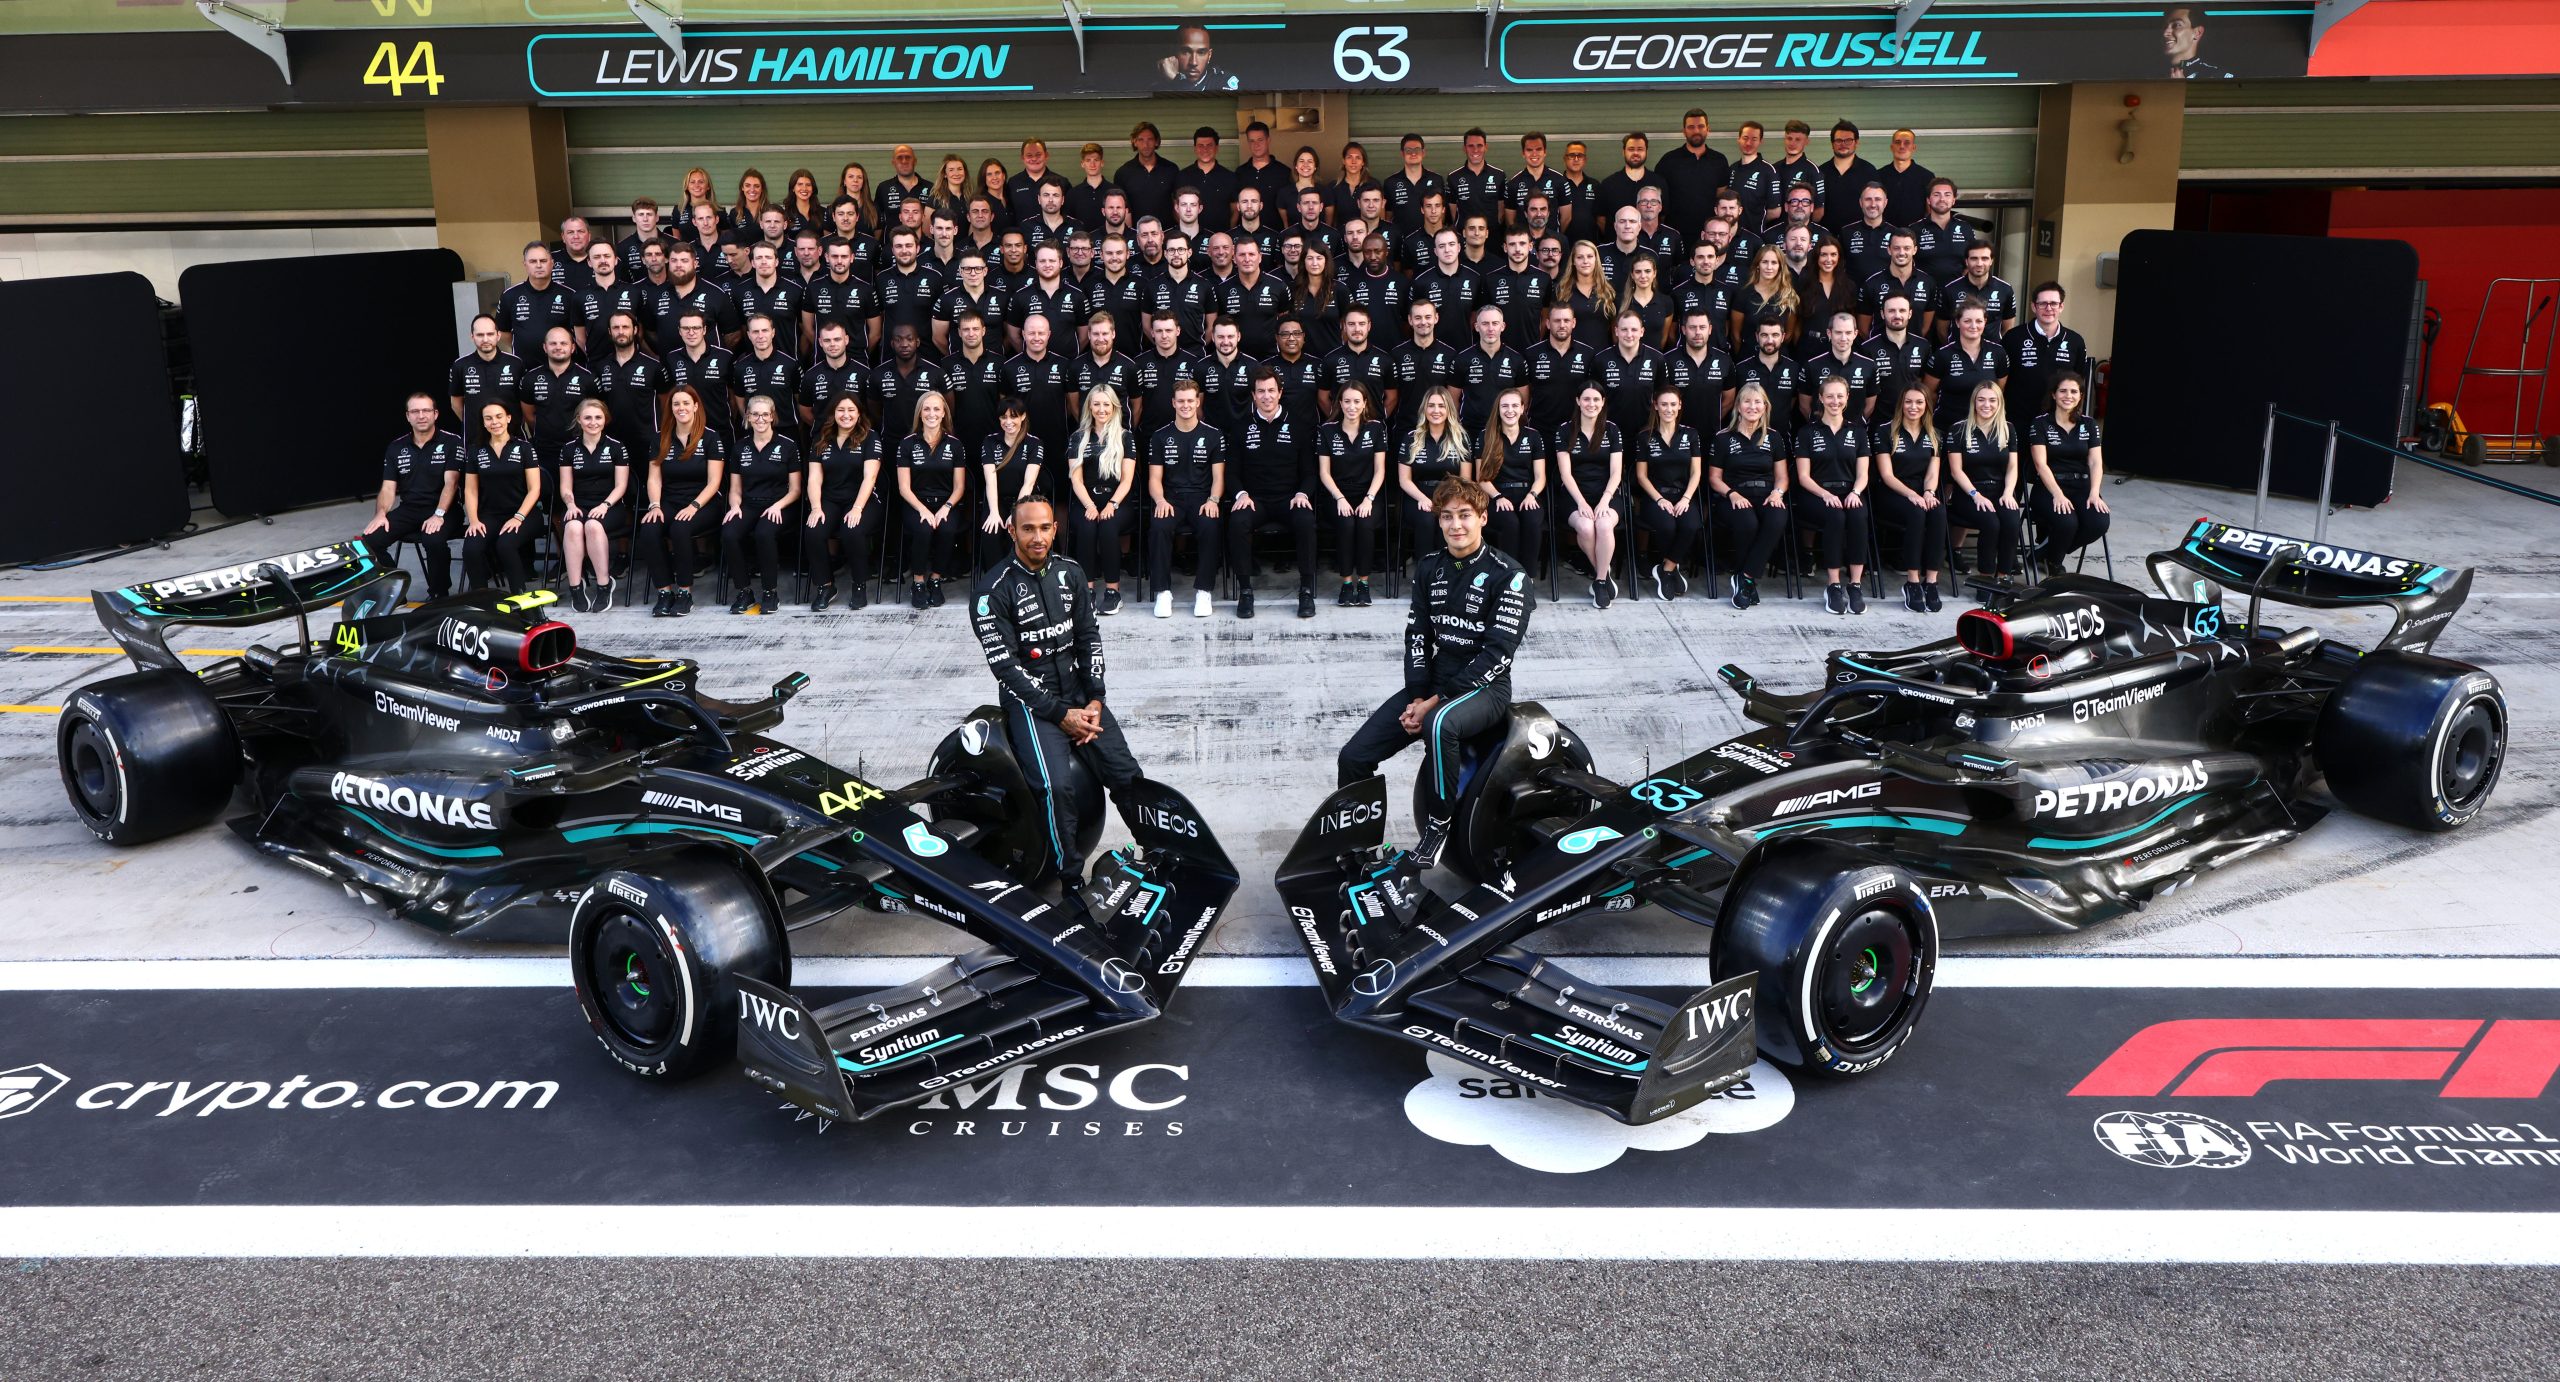 The entire Mercedes team posing ahead of the final grand prix of the season at Abu Dhabi, 2023.